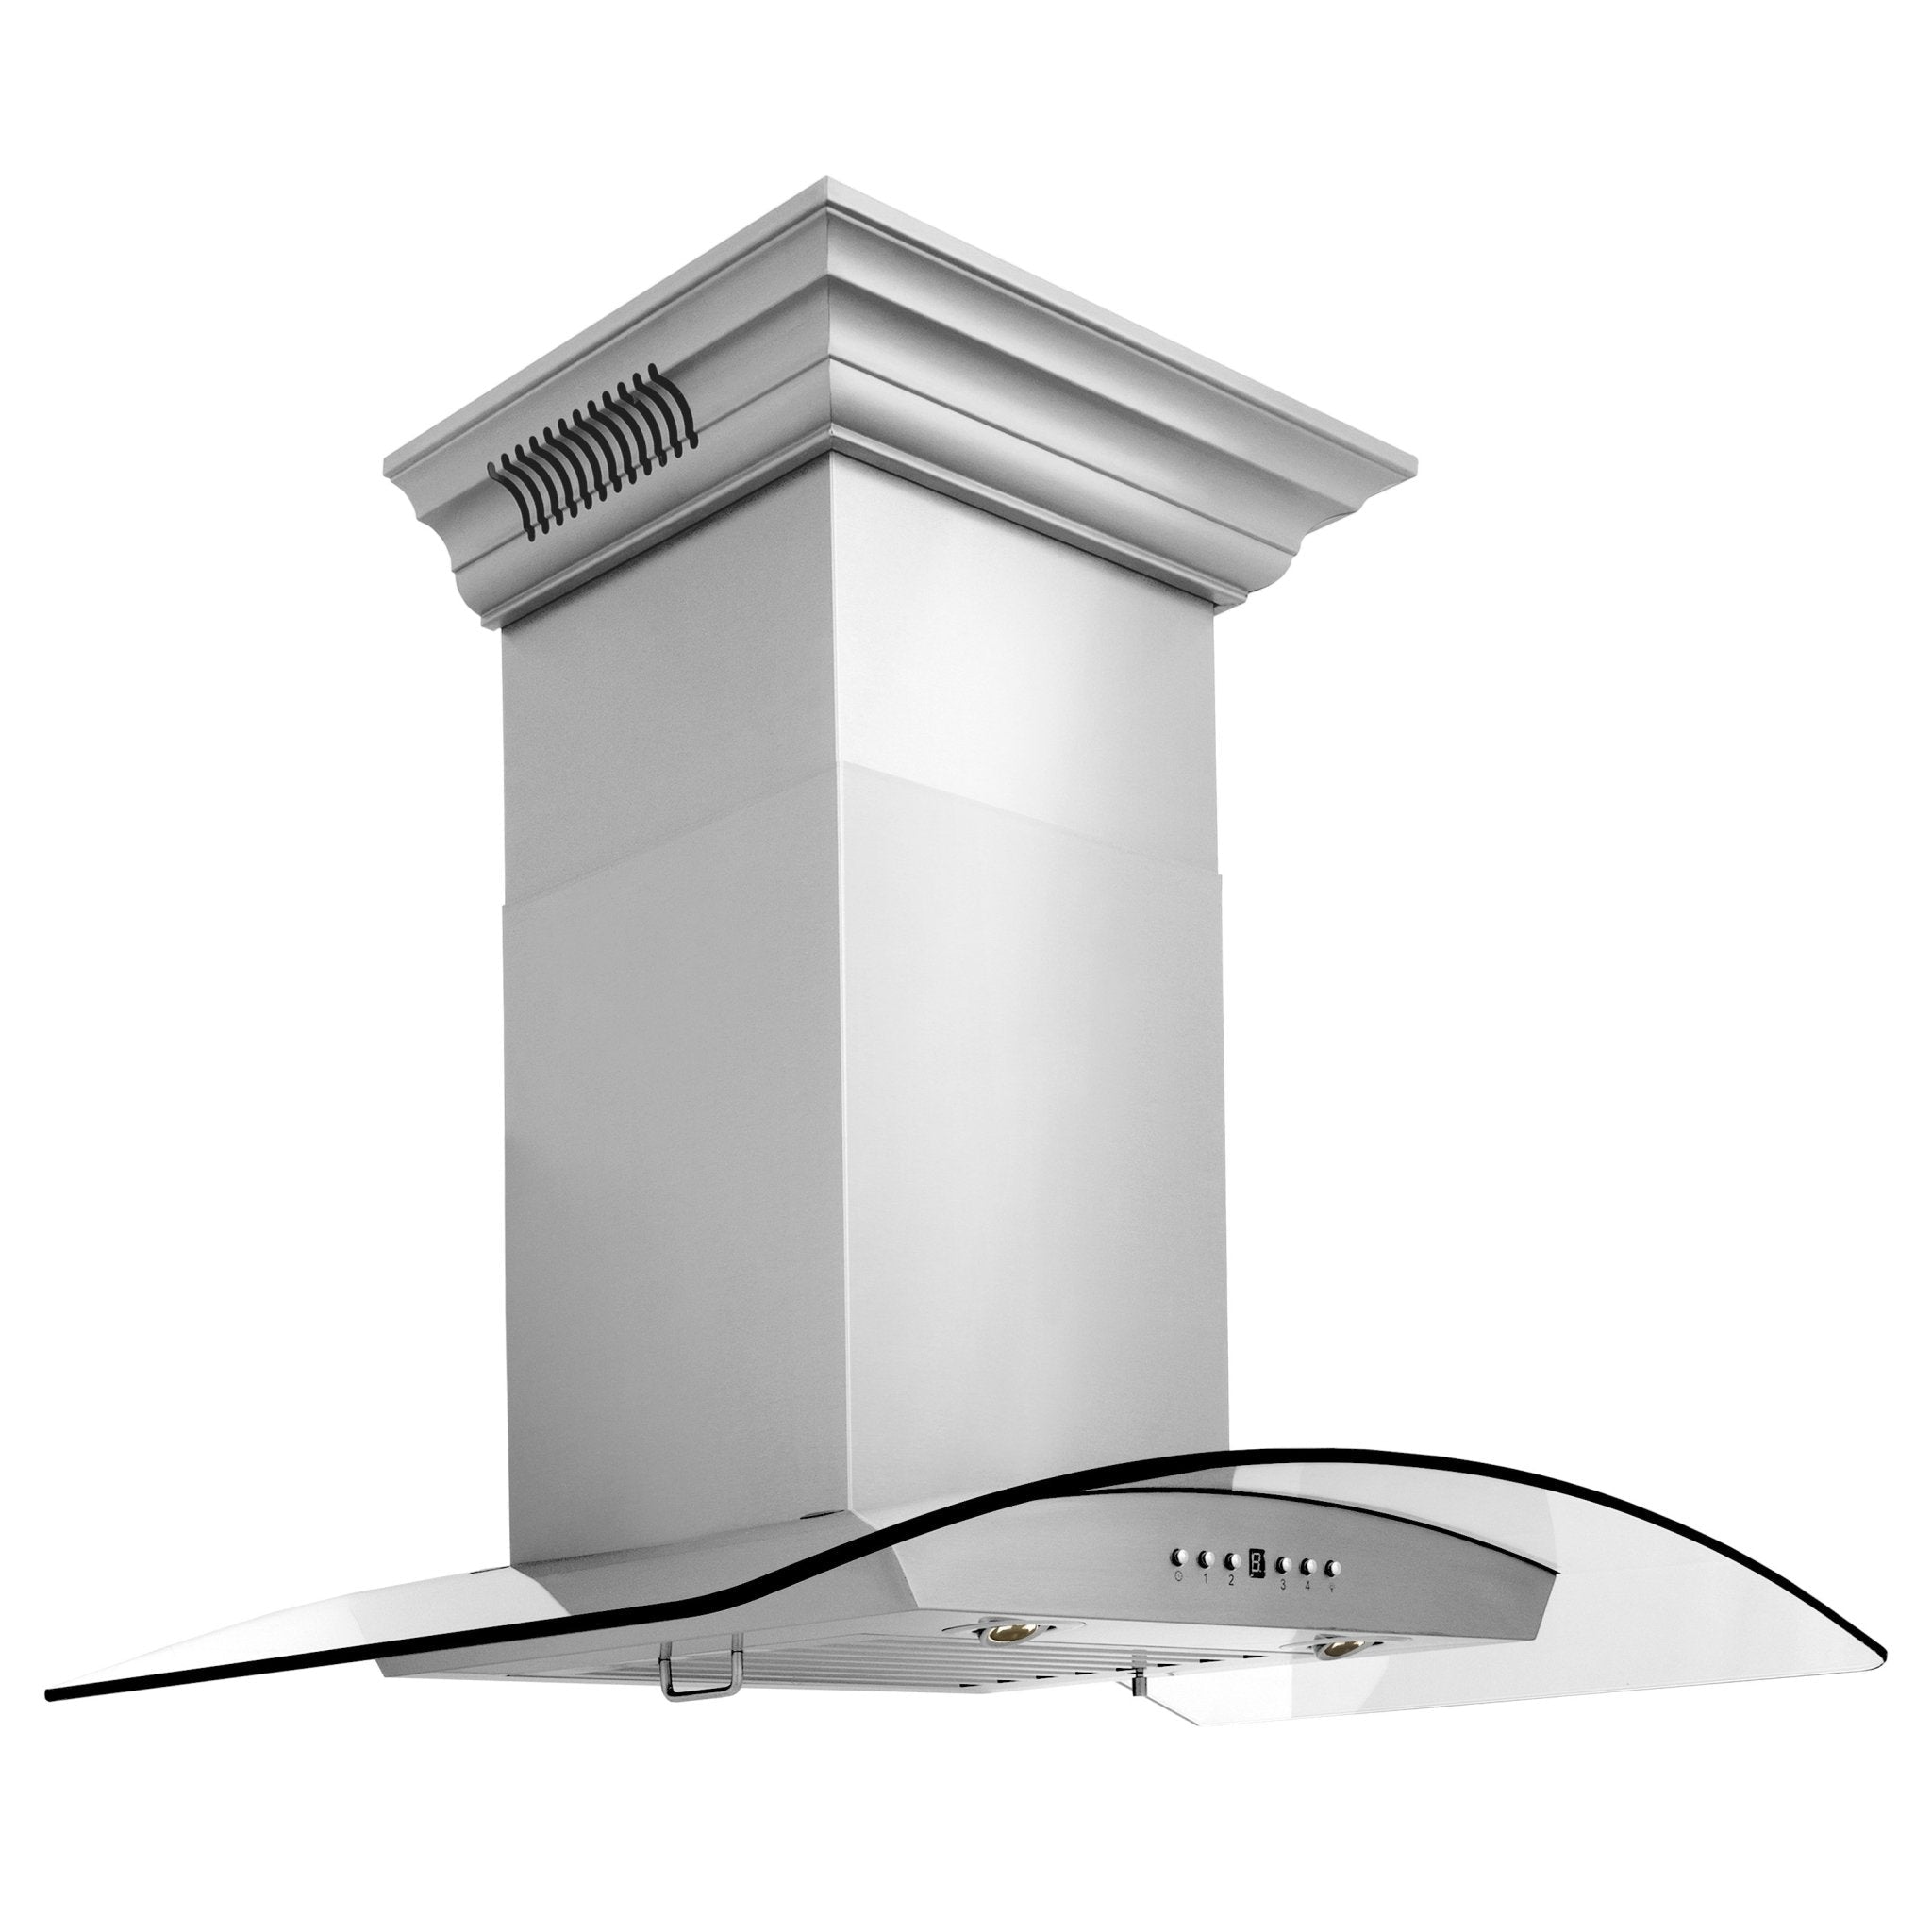 ZLINE Wall Mount Range Hood in Stainless Steel and Glass with Built-in CrownSound Bluetooth Speakers (KZCRN-BT) 30 inch